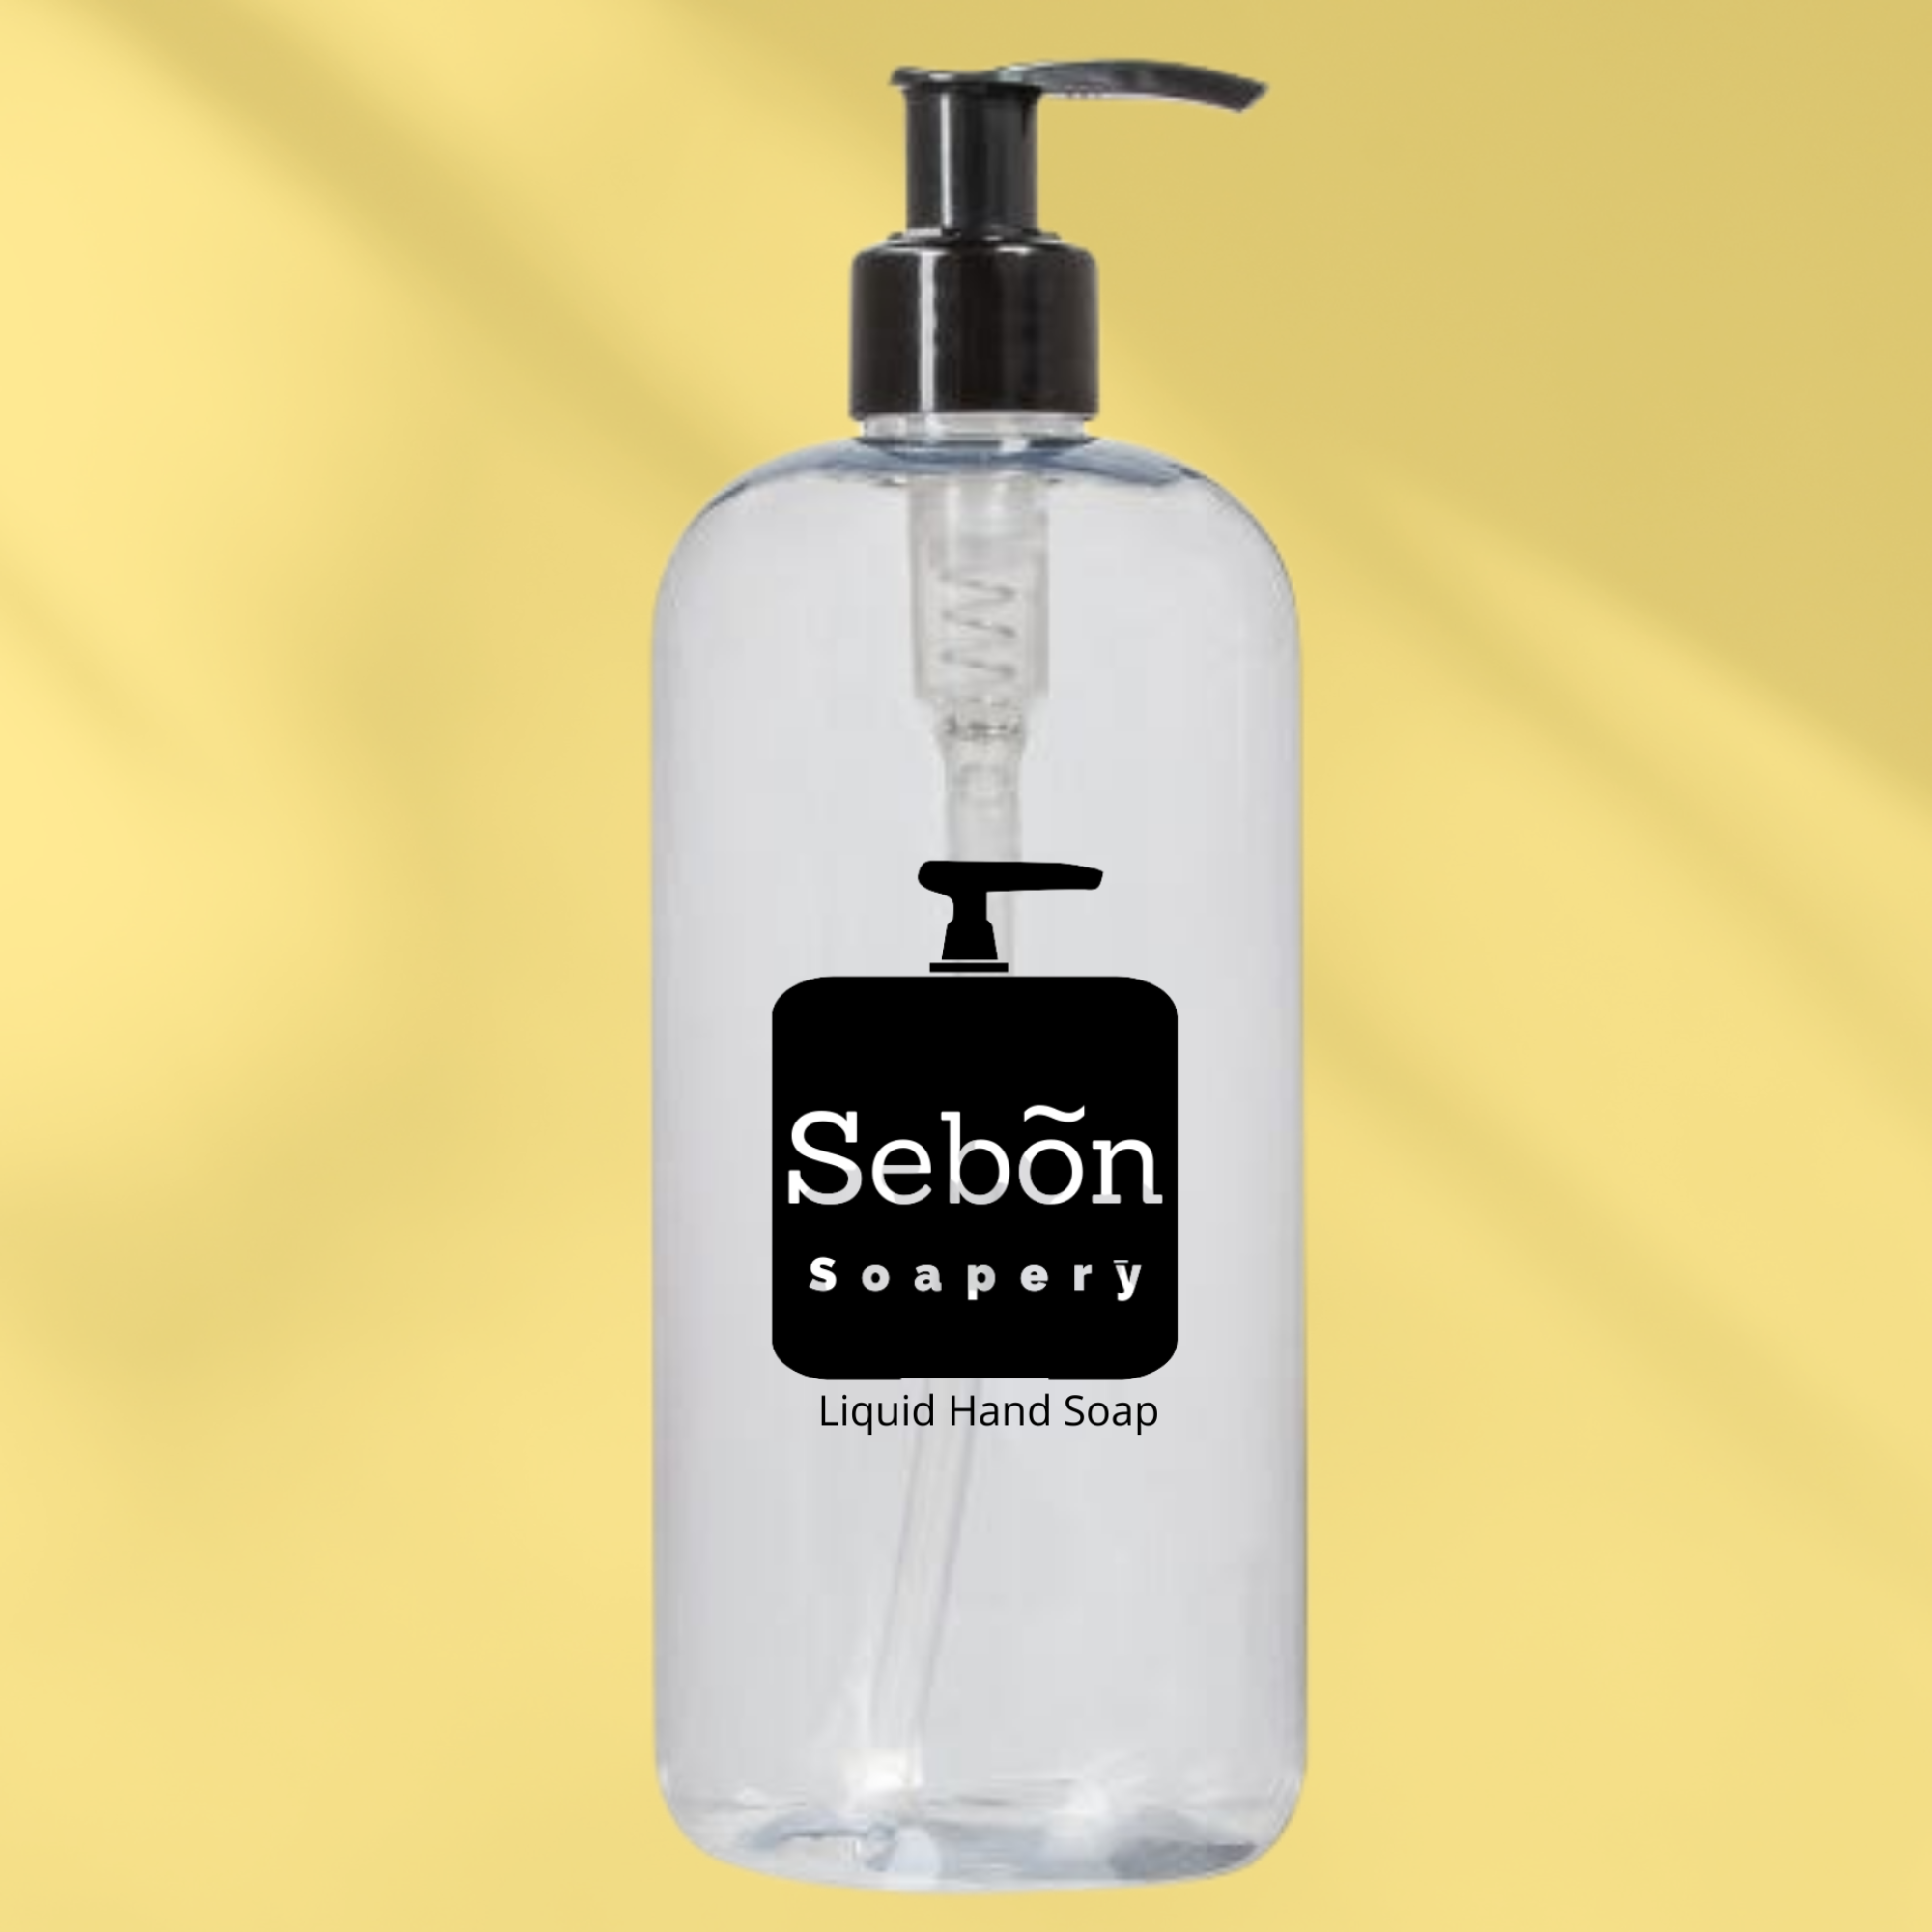 Sebon Blackberry Kiss Scented Liquid Hand Soap with Olive Oil